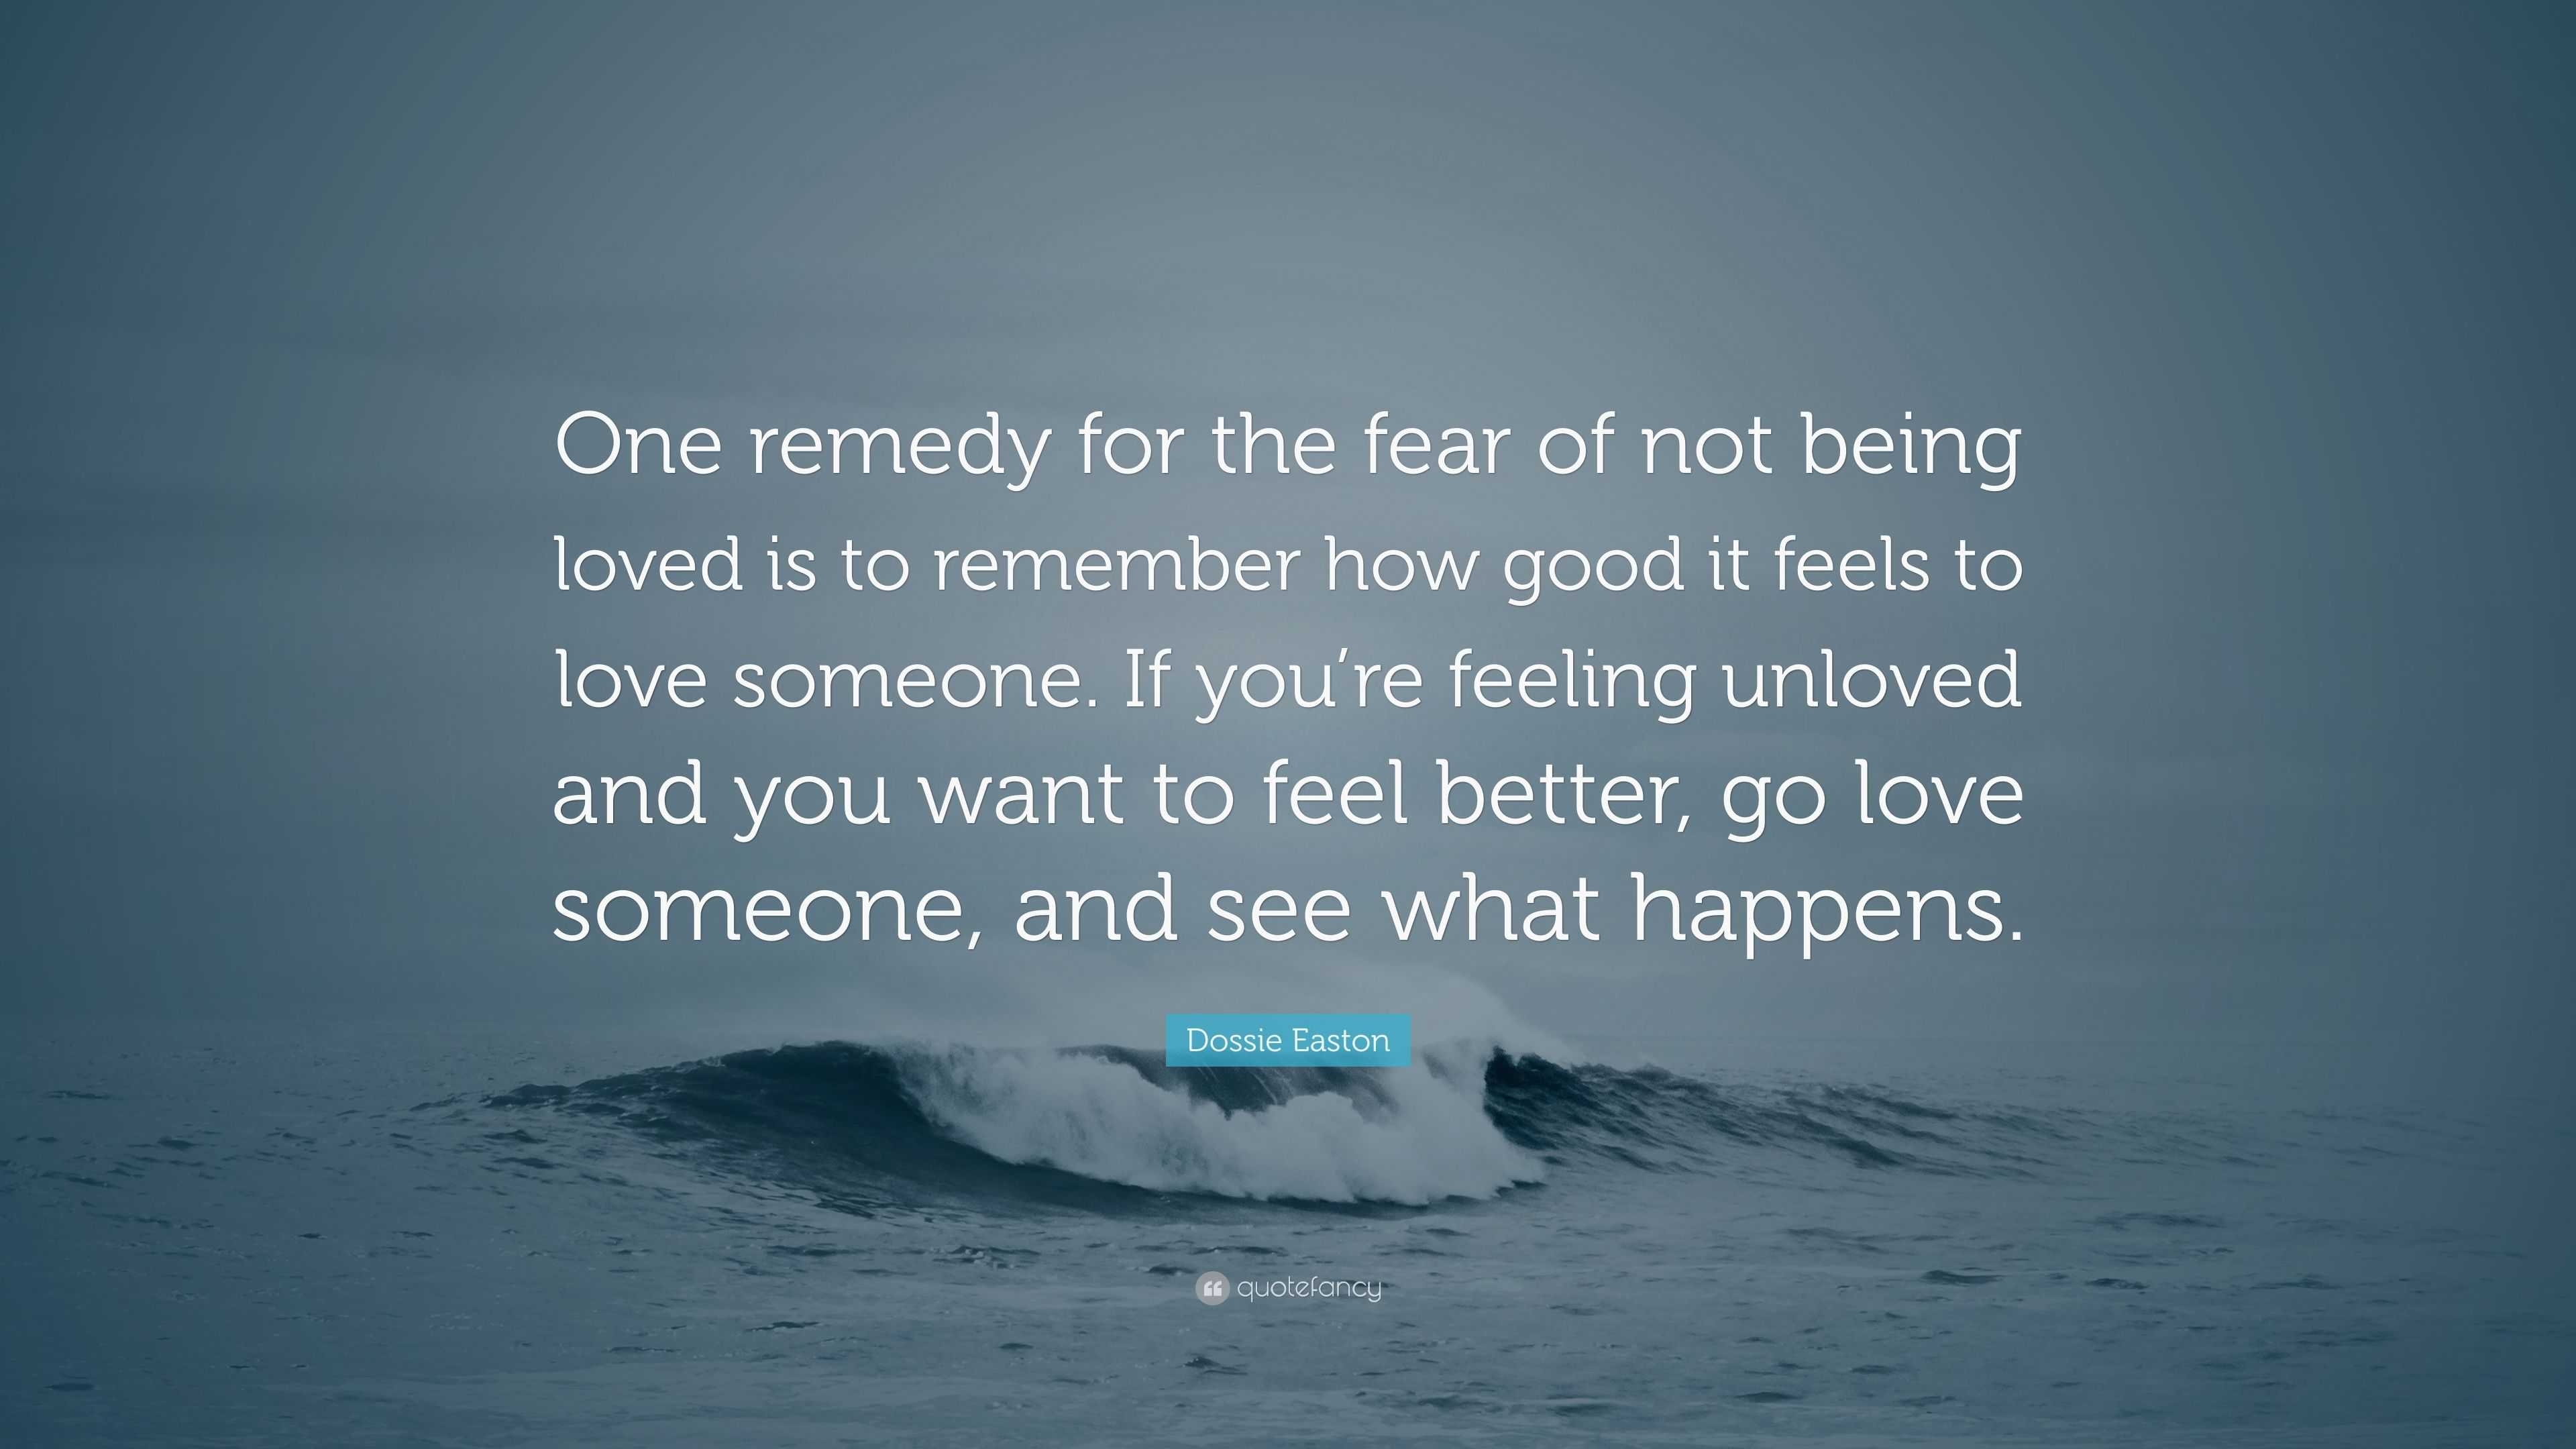 Dossie Easton Quote “one Remedy For The Fear Of Not Being Loved Is To Remember How Good It